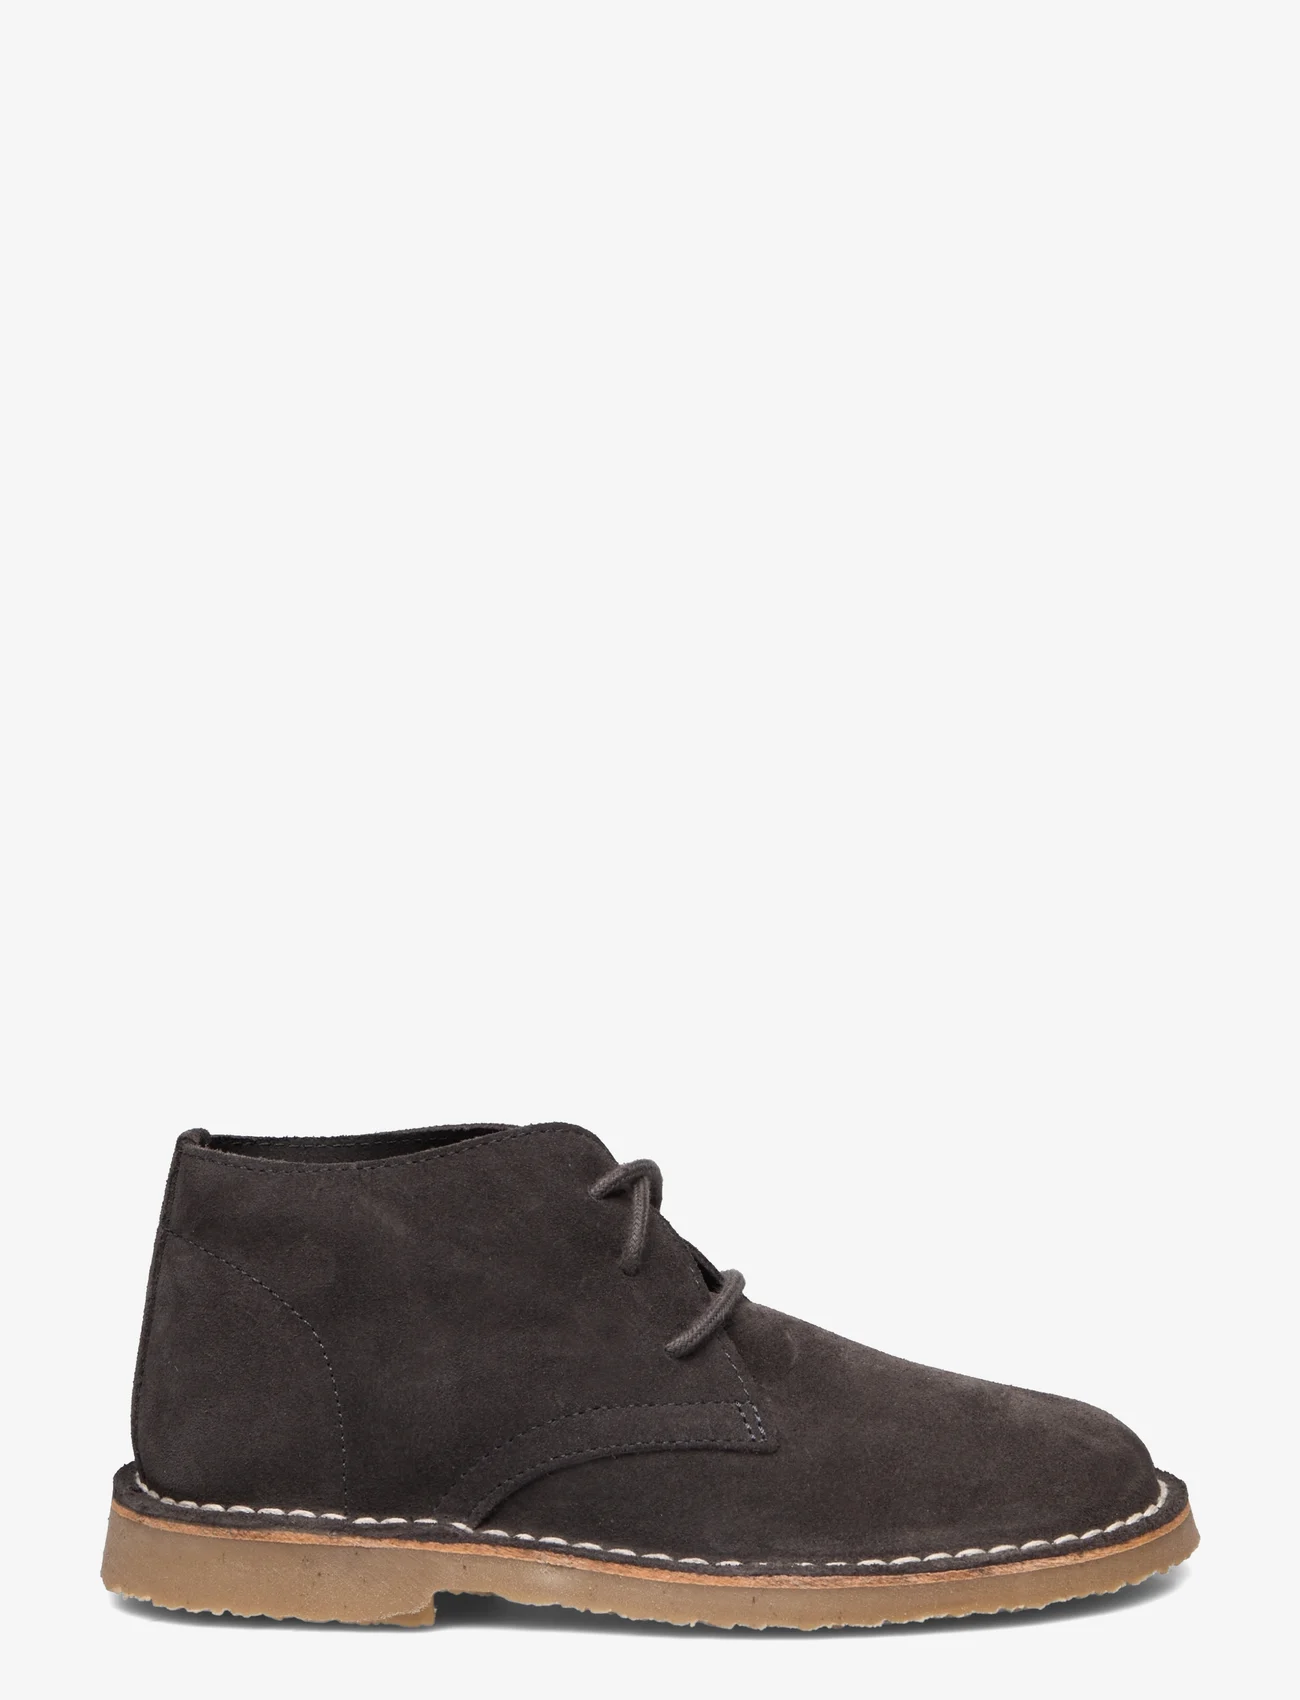 Mango - Lace-up leather boots - lapset - charcoal - 1